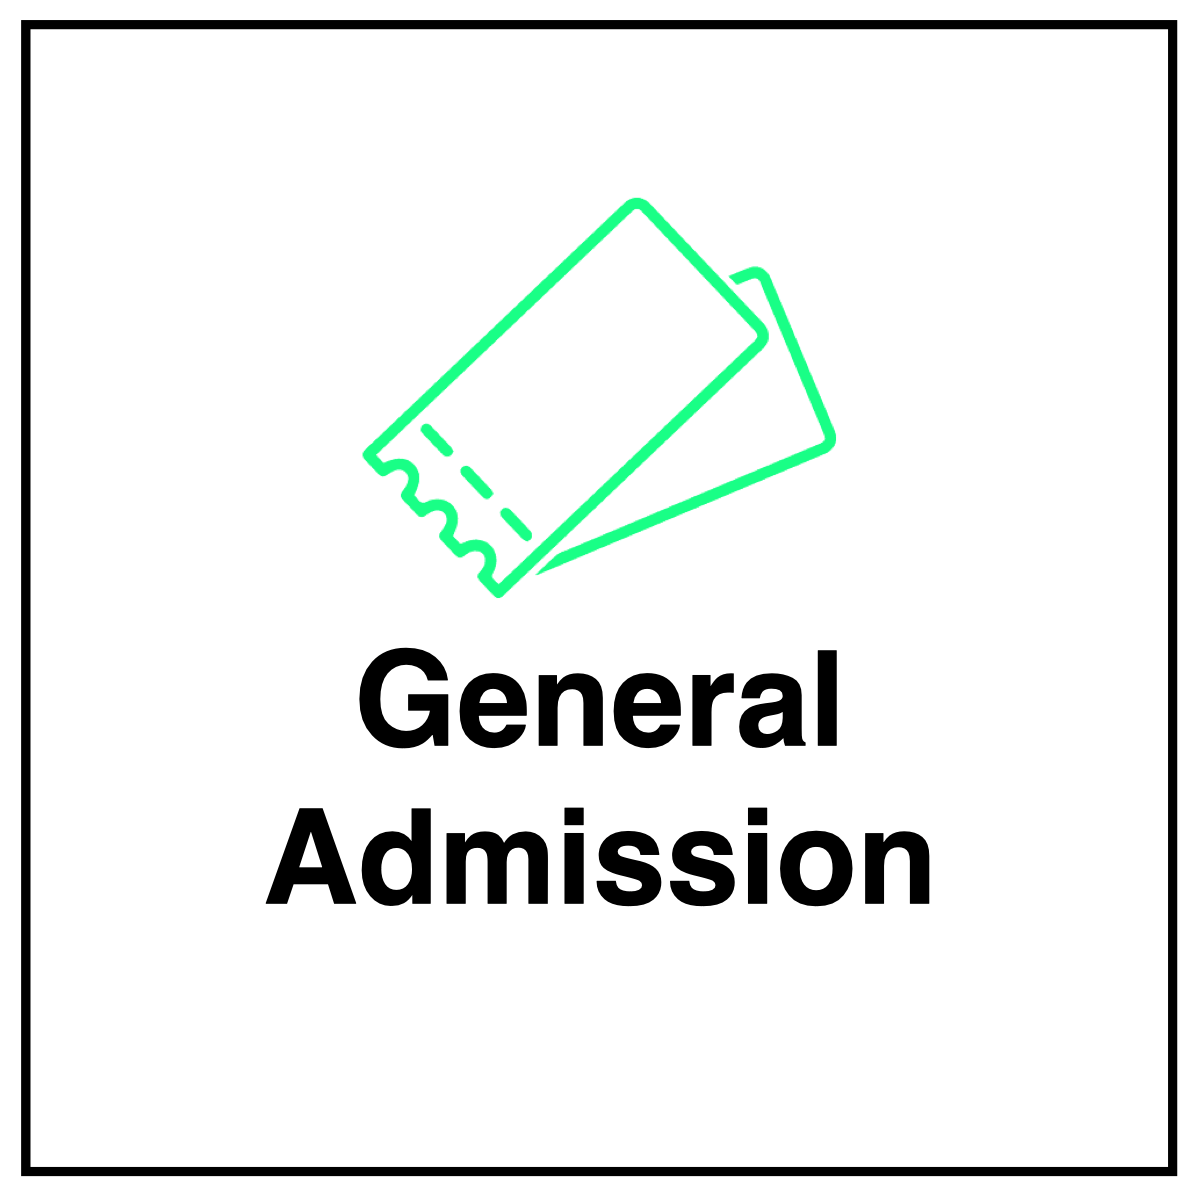 FTC - General Admission